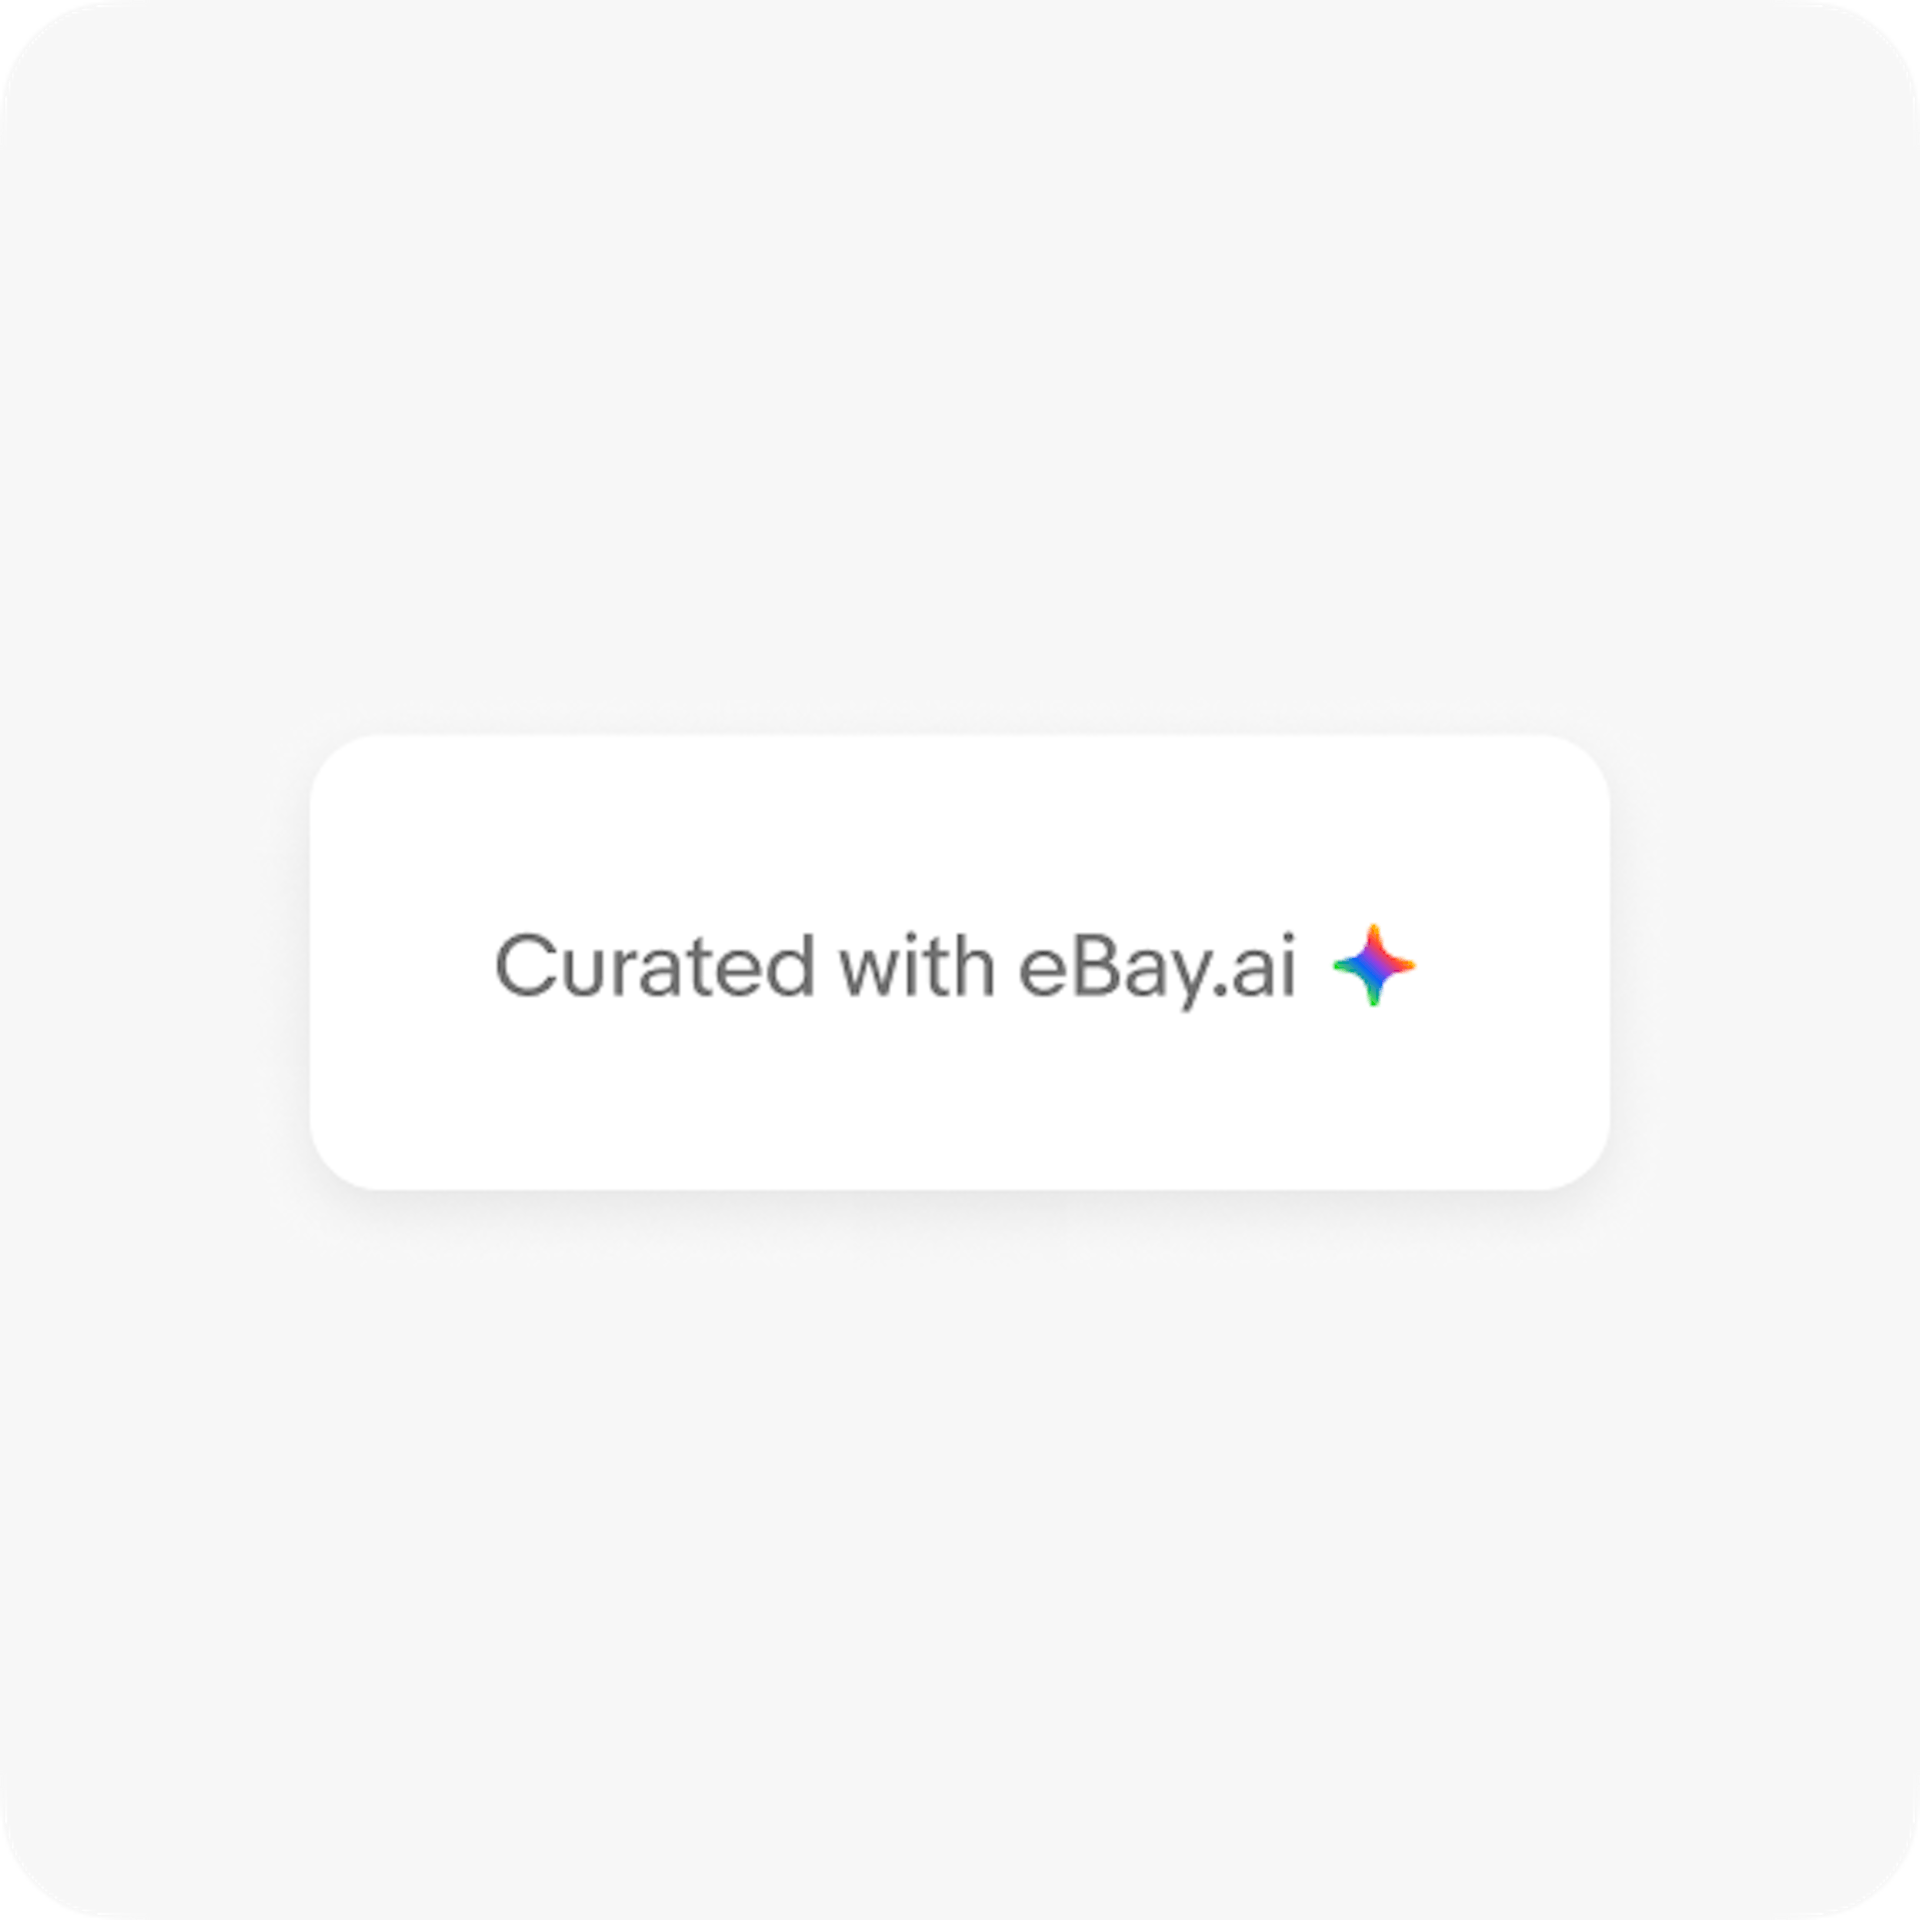 Example of a label that says “Curated with eBay.ai” followed by the full spectrum icon in color.